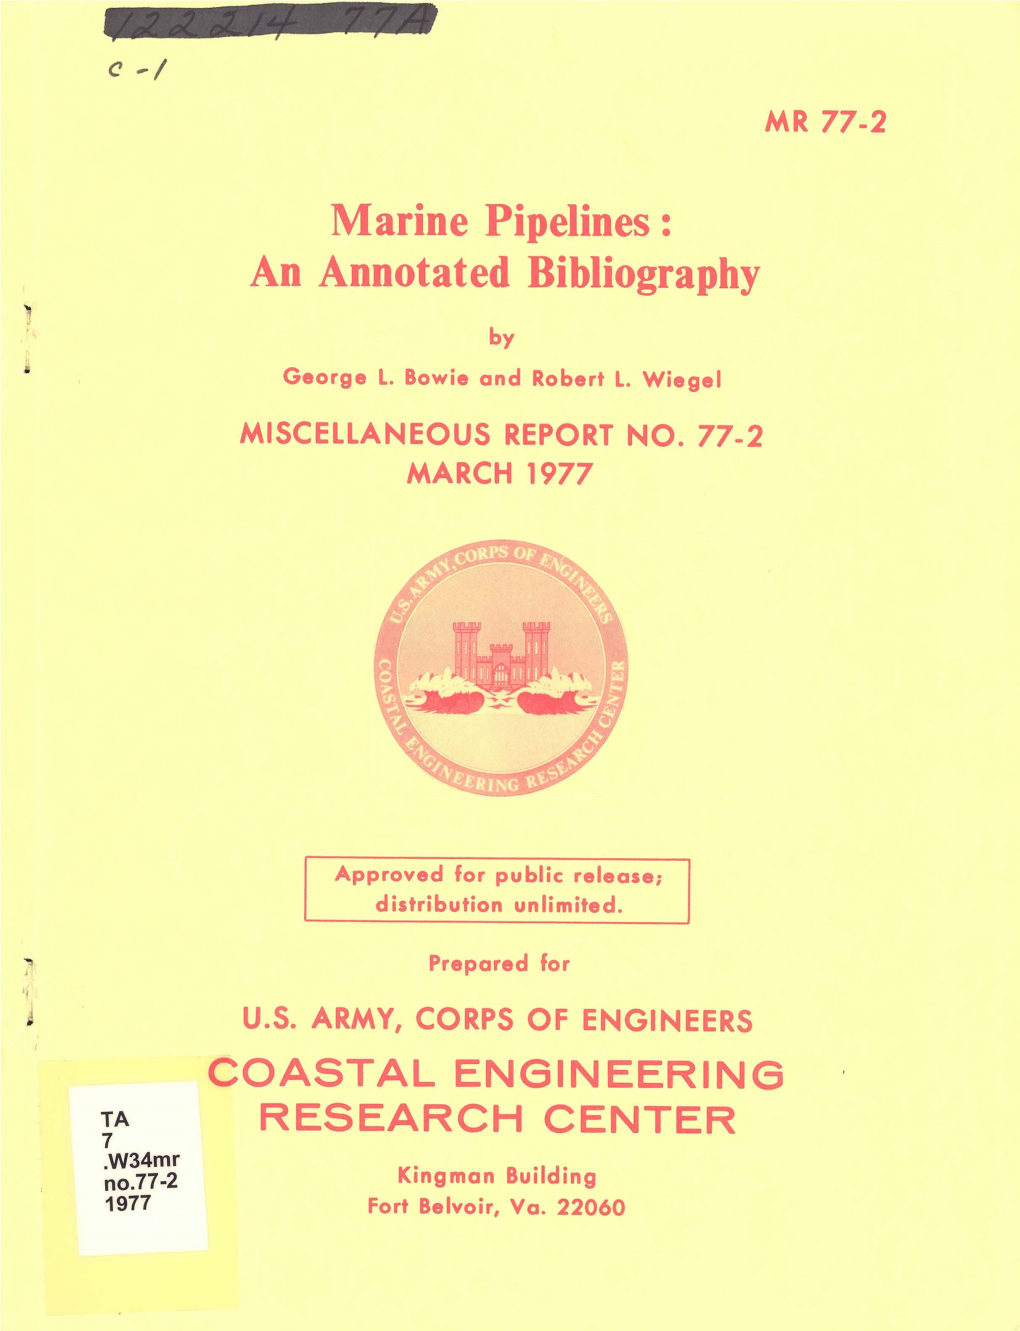 Marine Pipelines: an Annotated Bibliography